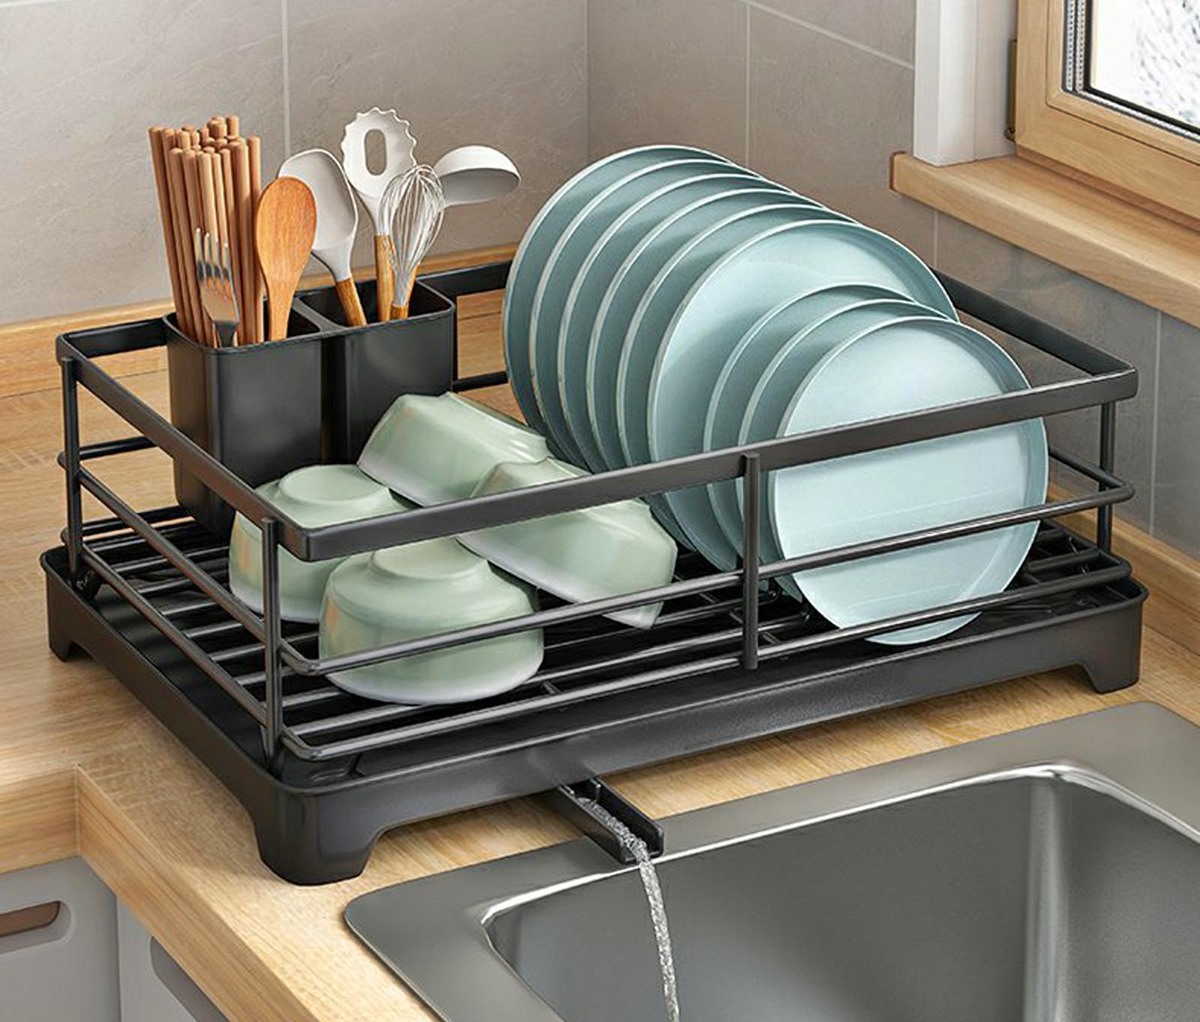 SONGMICS Dish Drying Rack, Stainless Steel Dish Rack with Rotatable Spout, Drainboard, Dish Drainers for Kitchen Counter, Silver and Gray